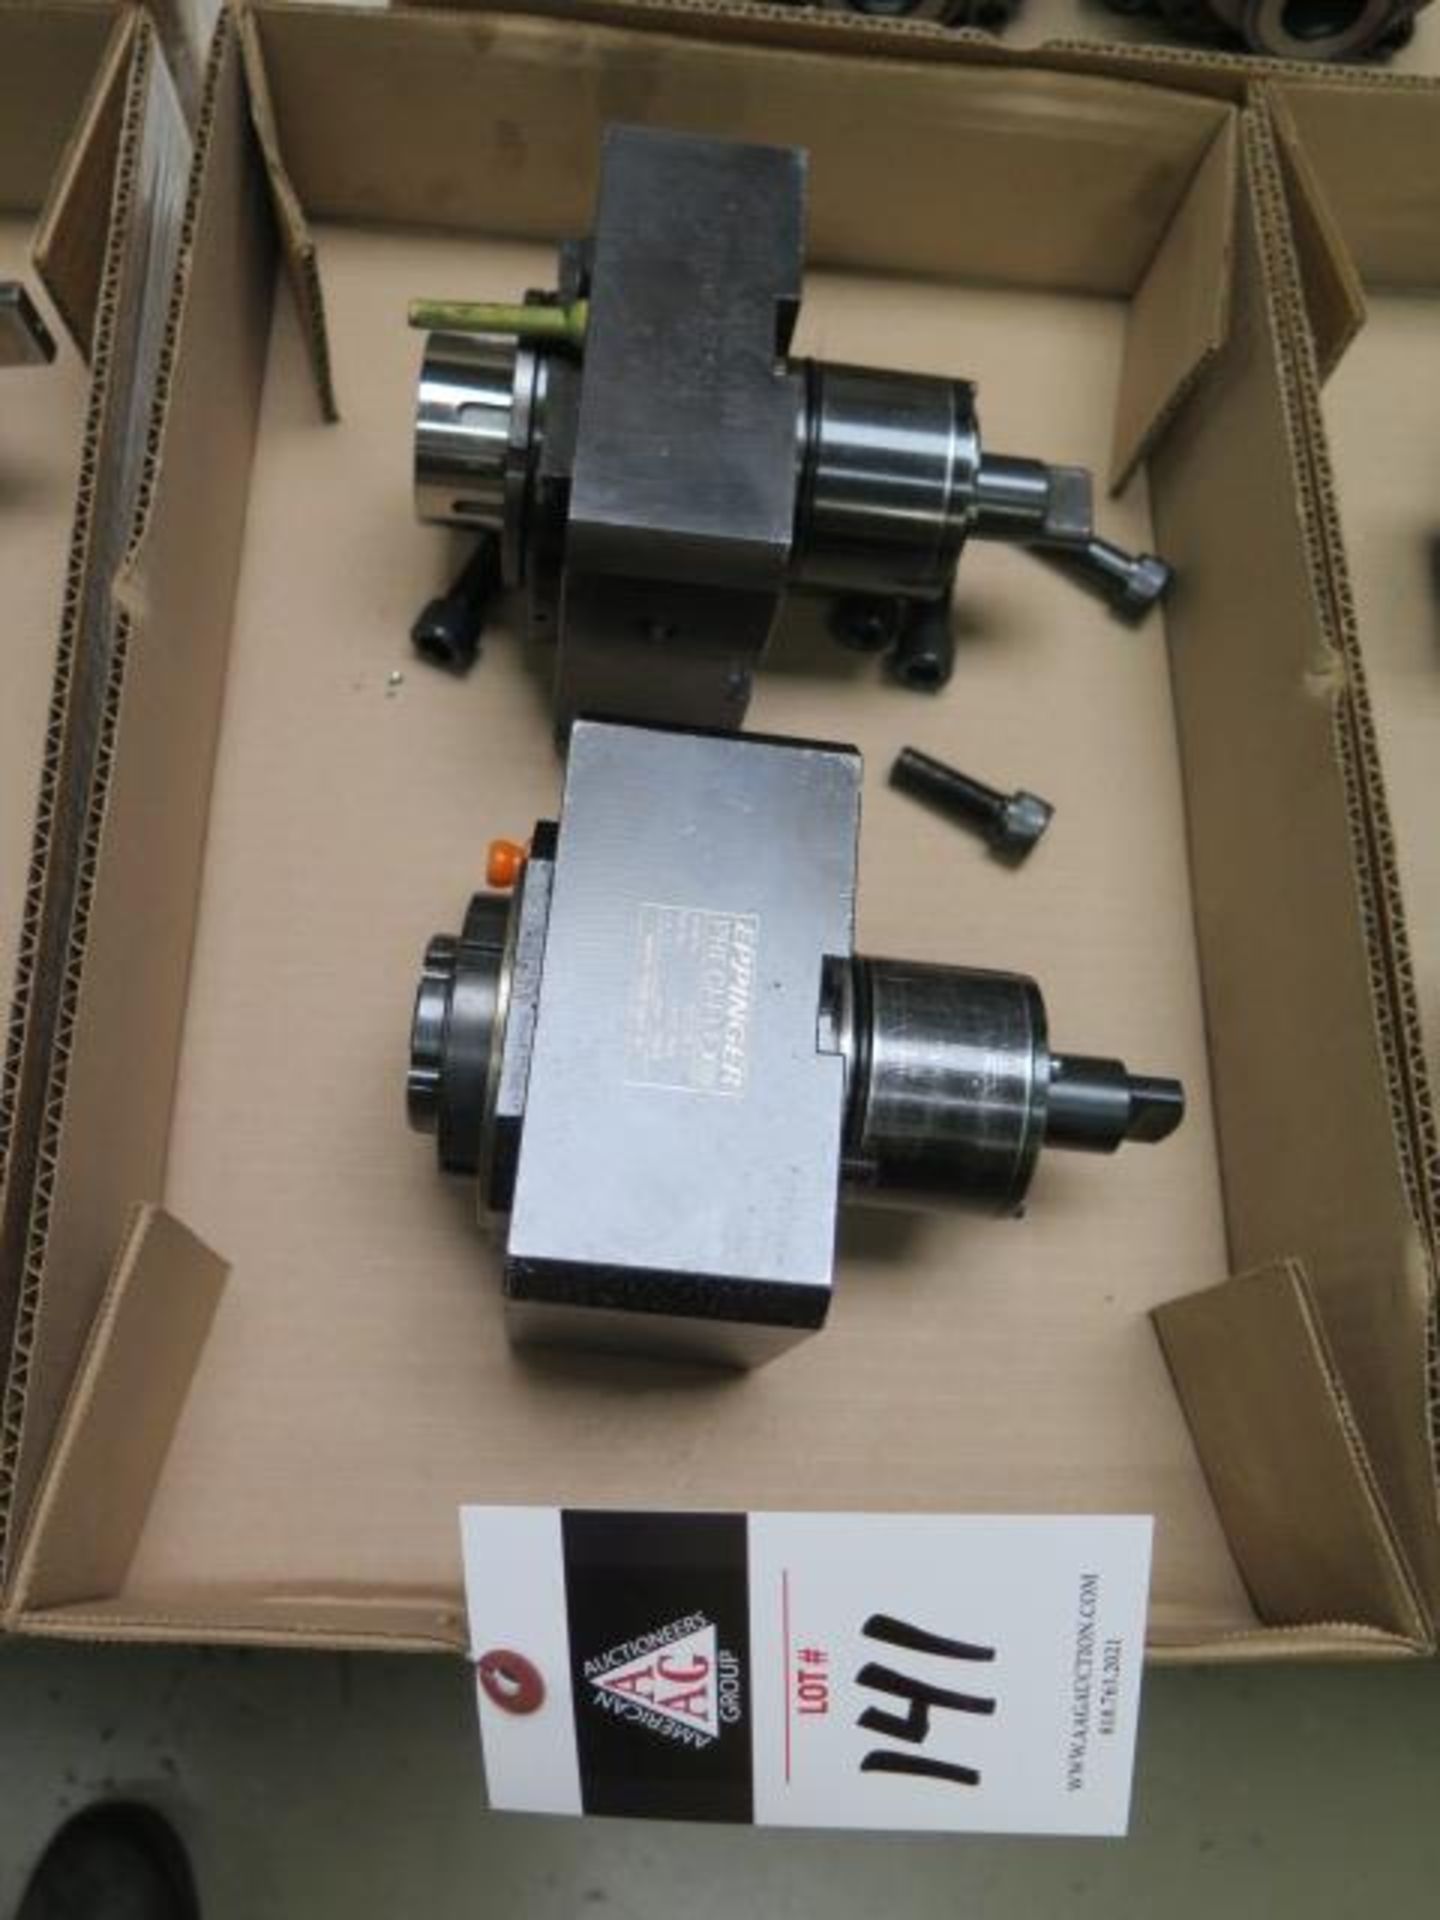 Axial Live Tool Holders (2 - Mori Seiki NL2500 and NL2000) (SOLD AS-IS - NO WARRANTY)